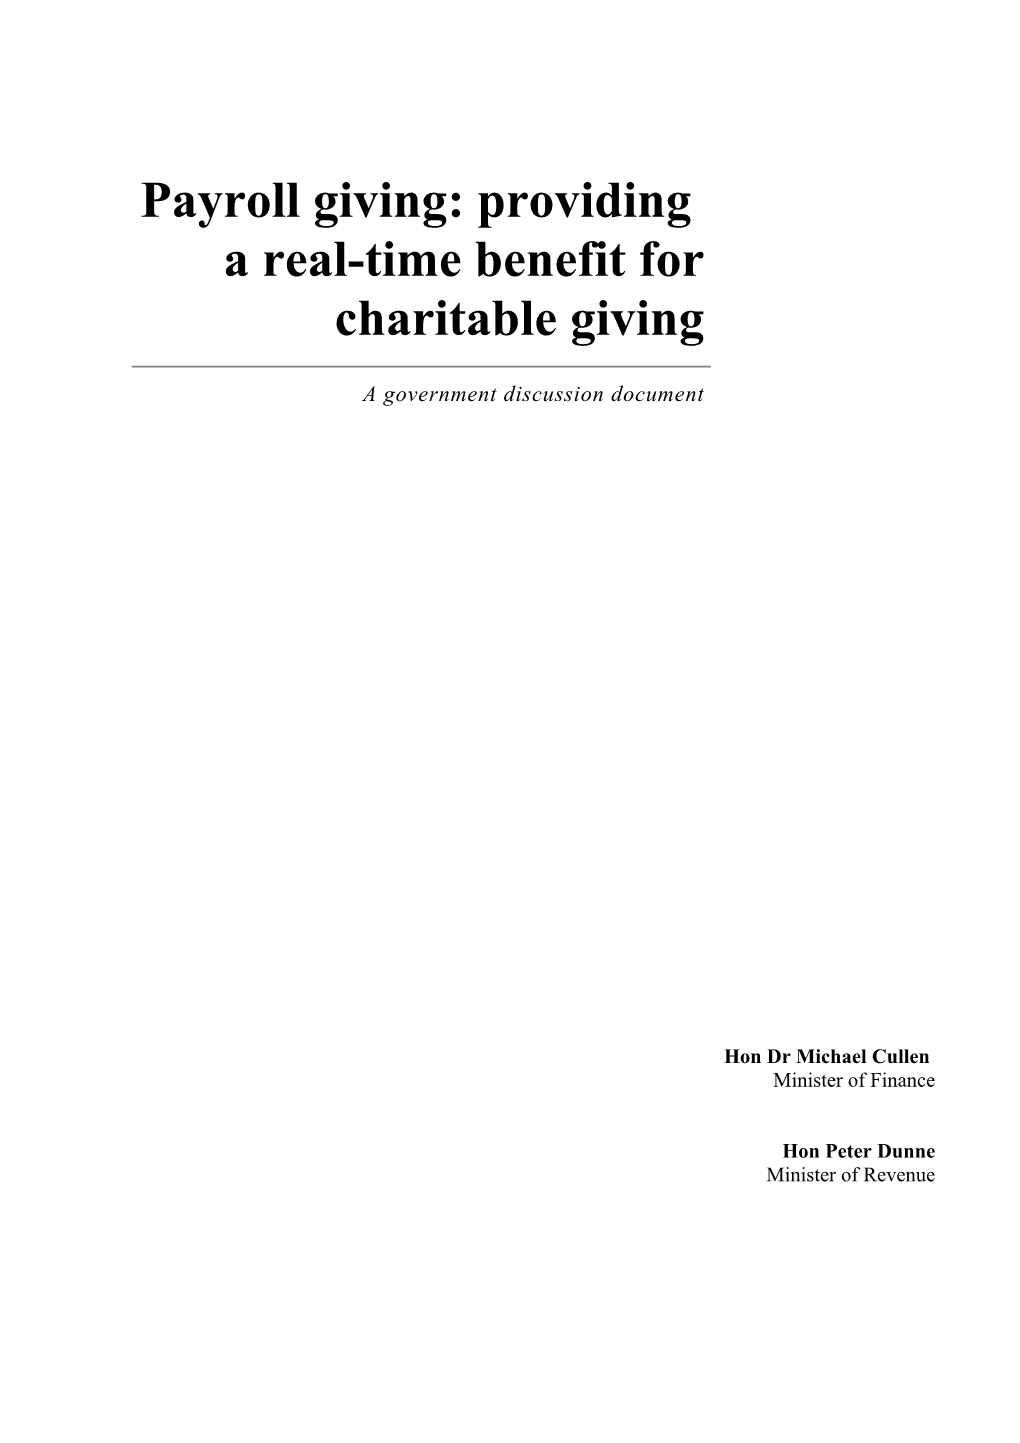 Payroll Giving Discussion Document: Providing a Real-Time Benefit for Charitable Giving